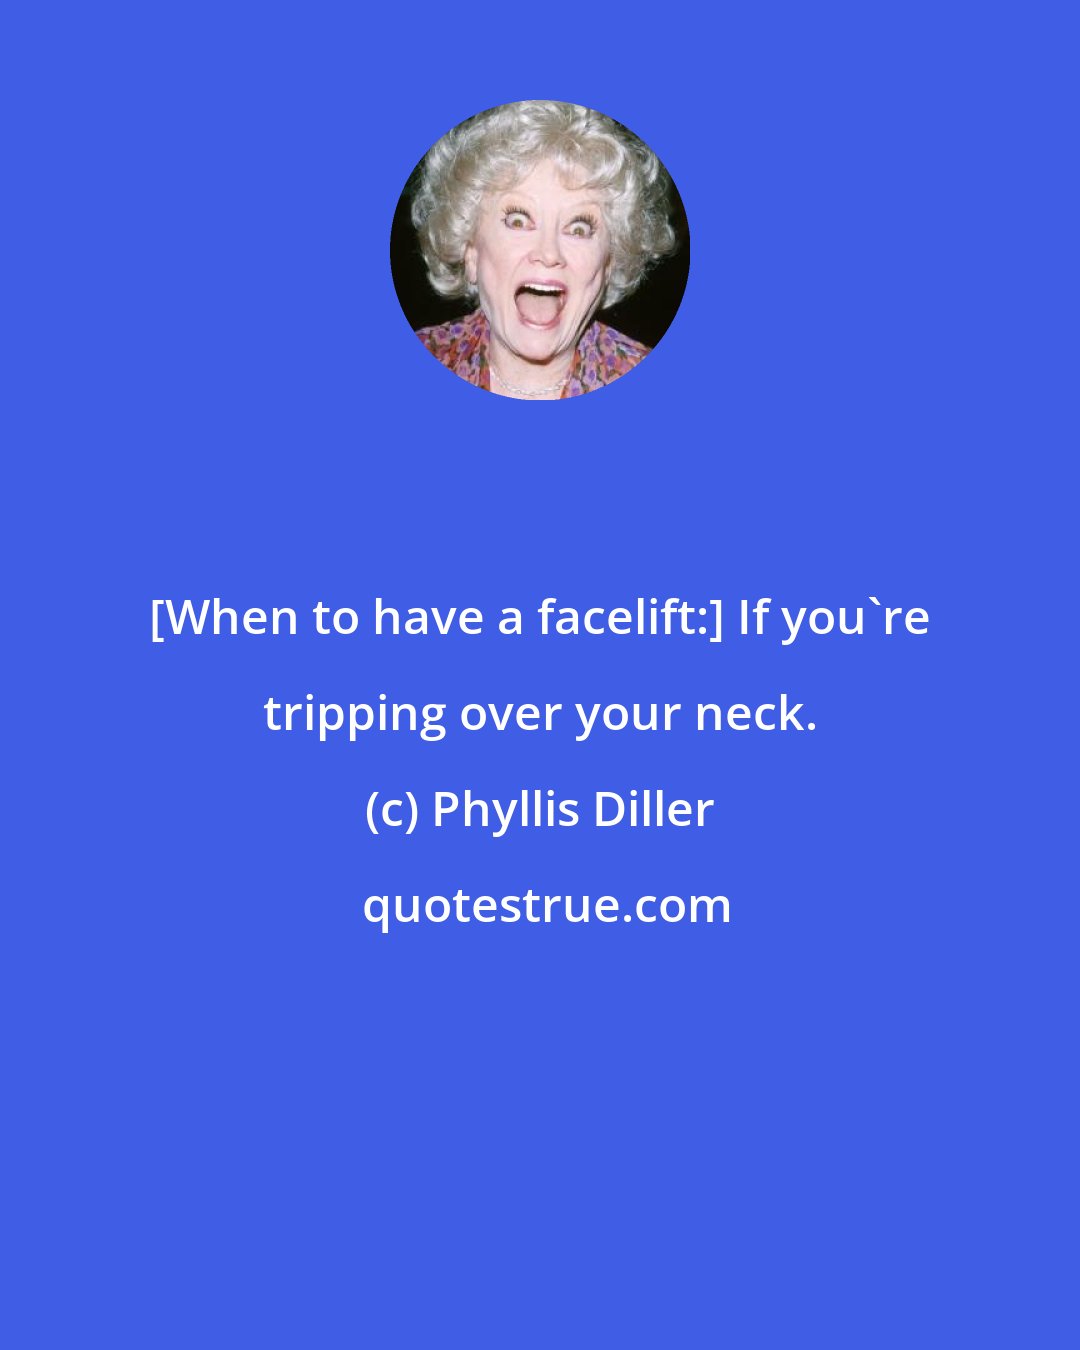 Phyllis Diller: [When to have a facelift:] If you're tripping over your neck.